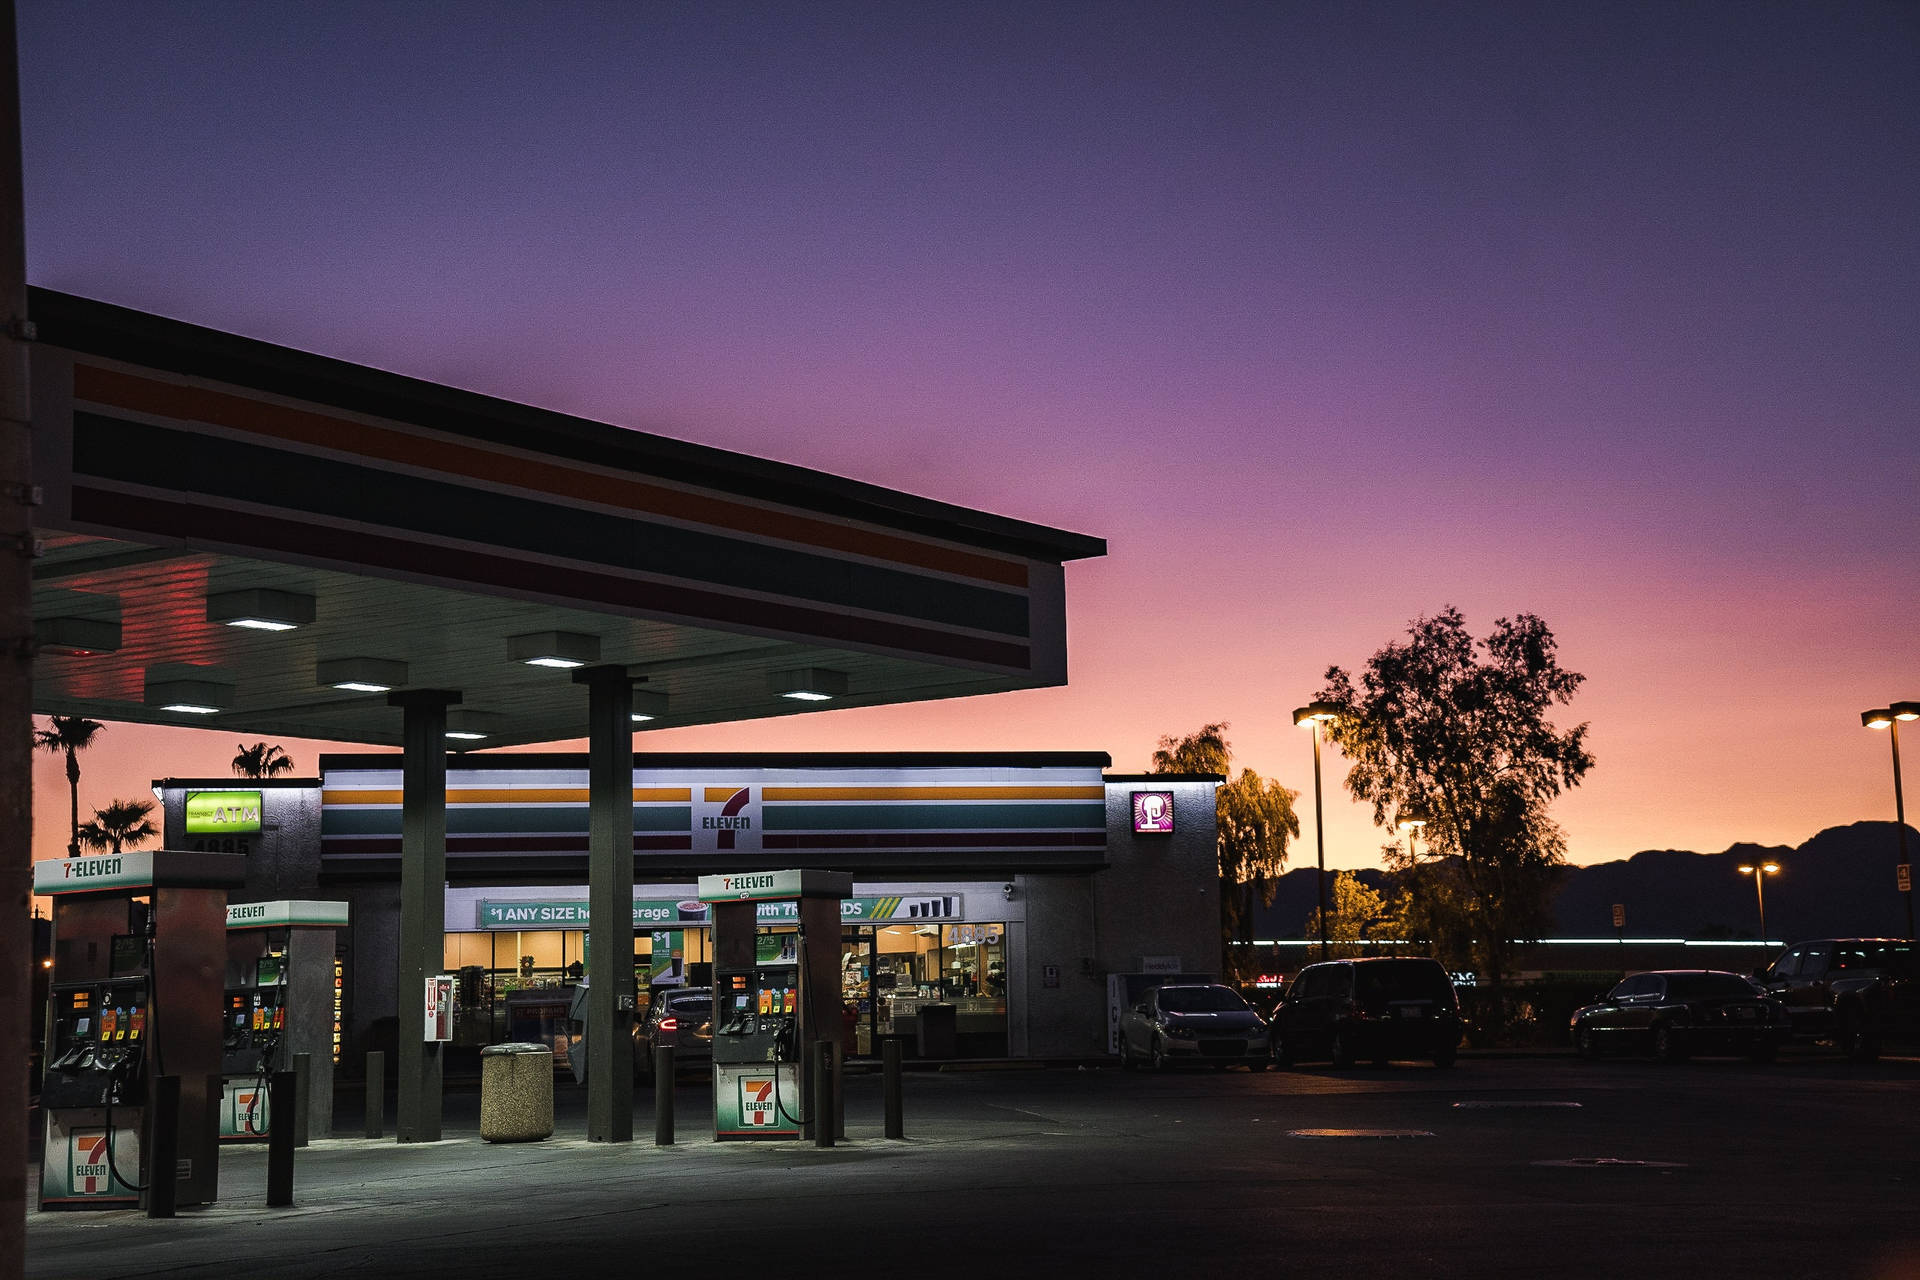 7 Eleven Store During Sunset Background